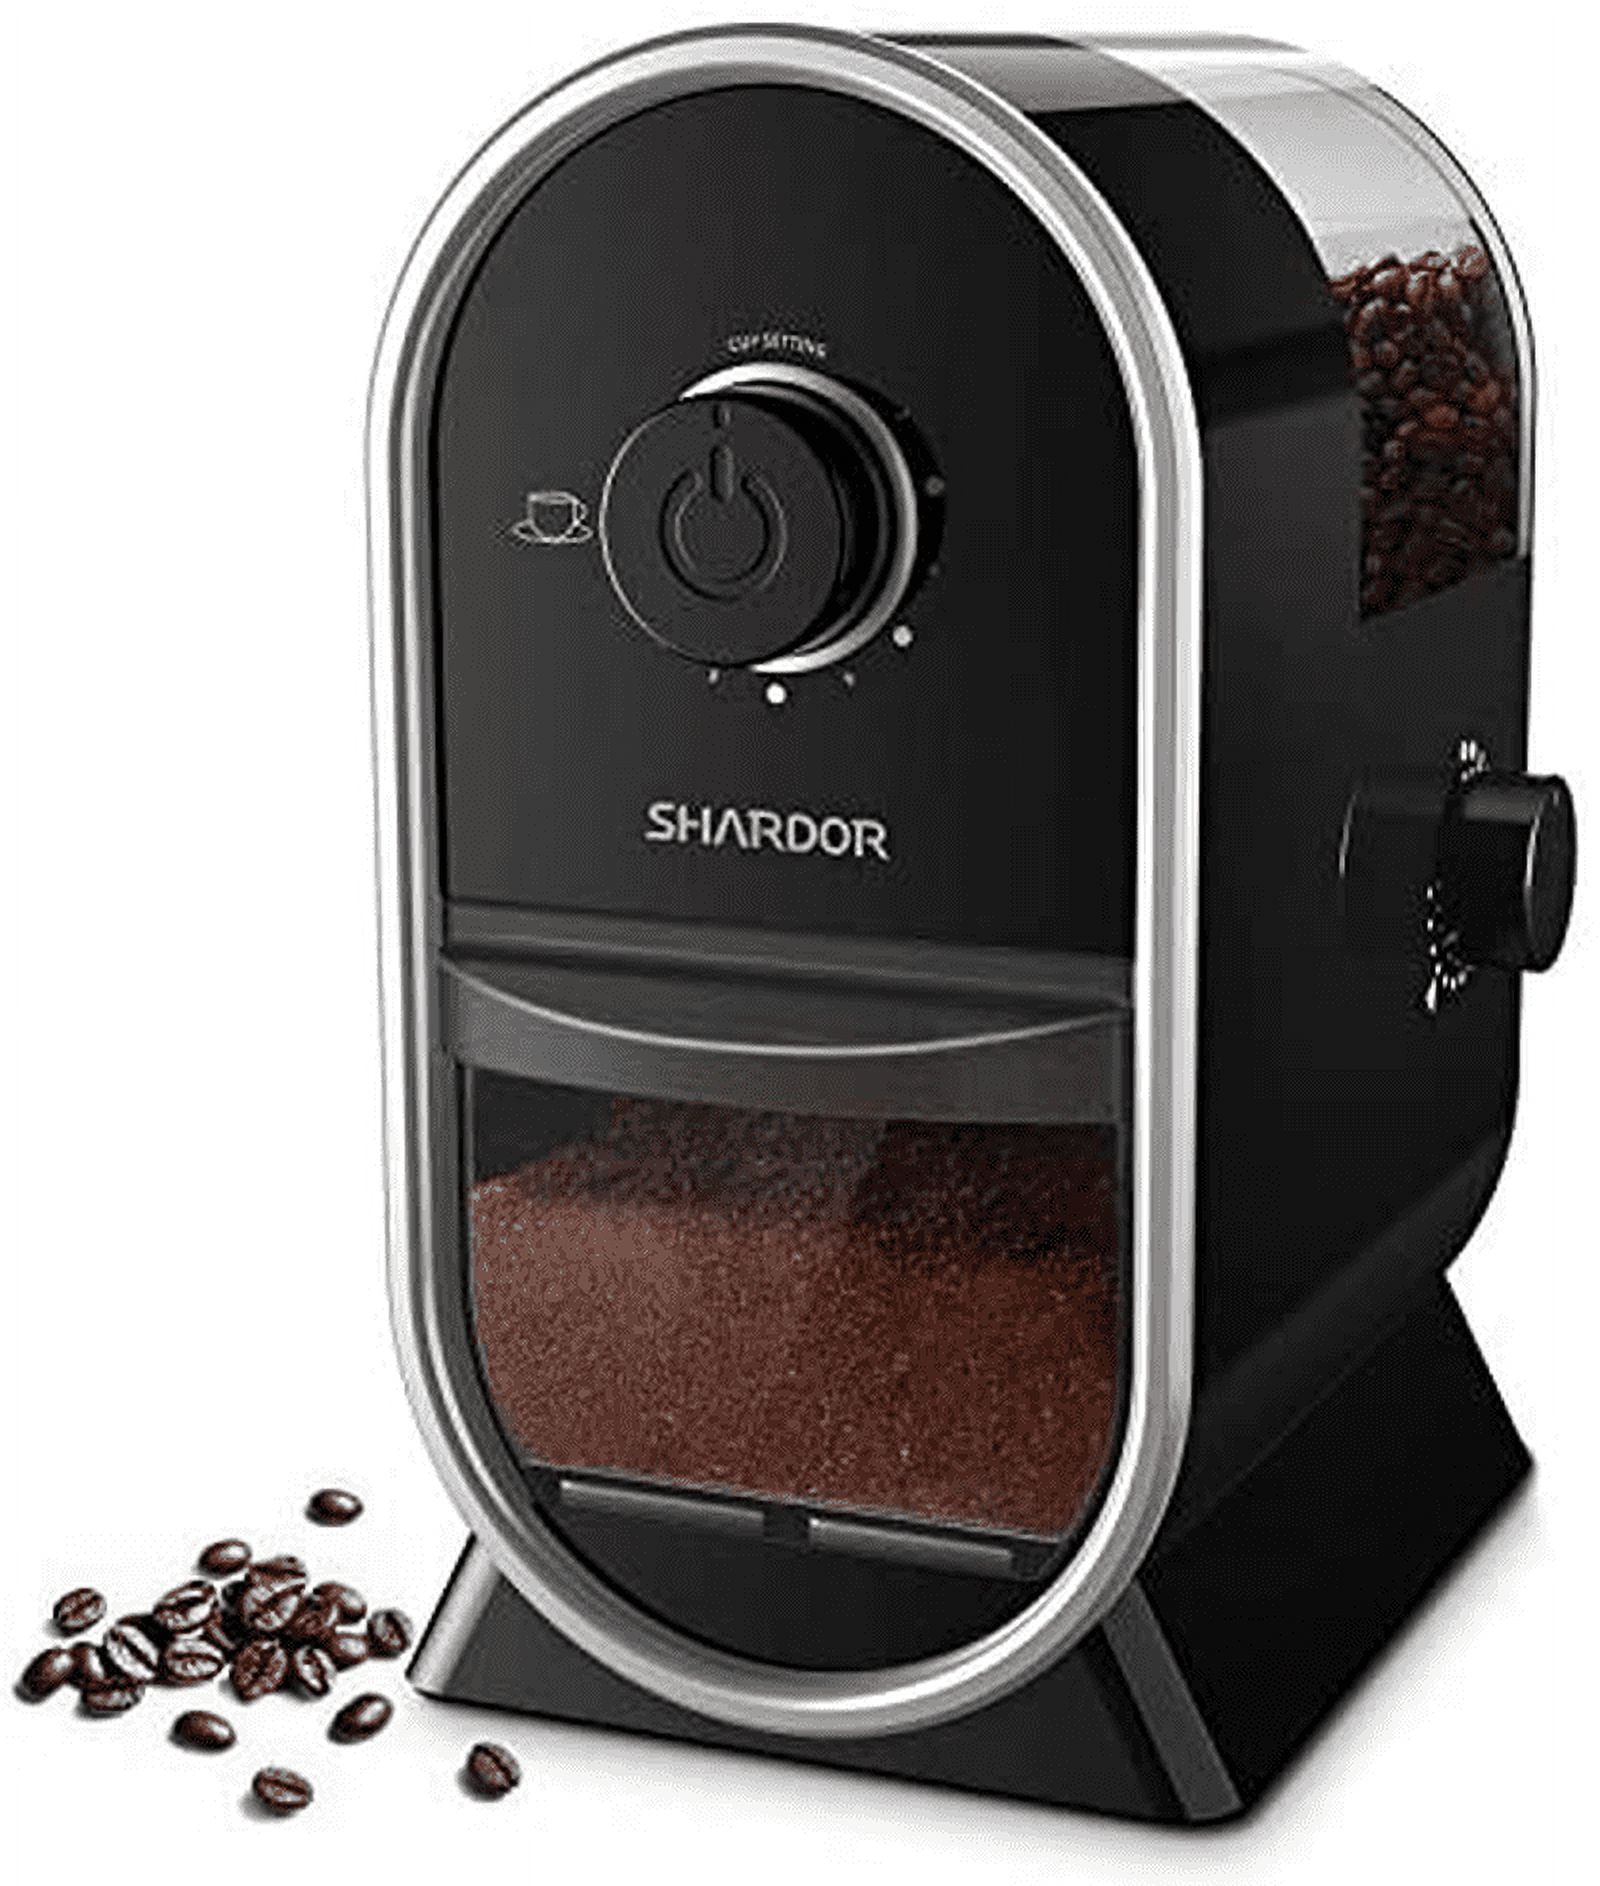 SHARDOR Electric Burr Coffee Grinder with 14 Grind Settings